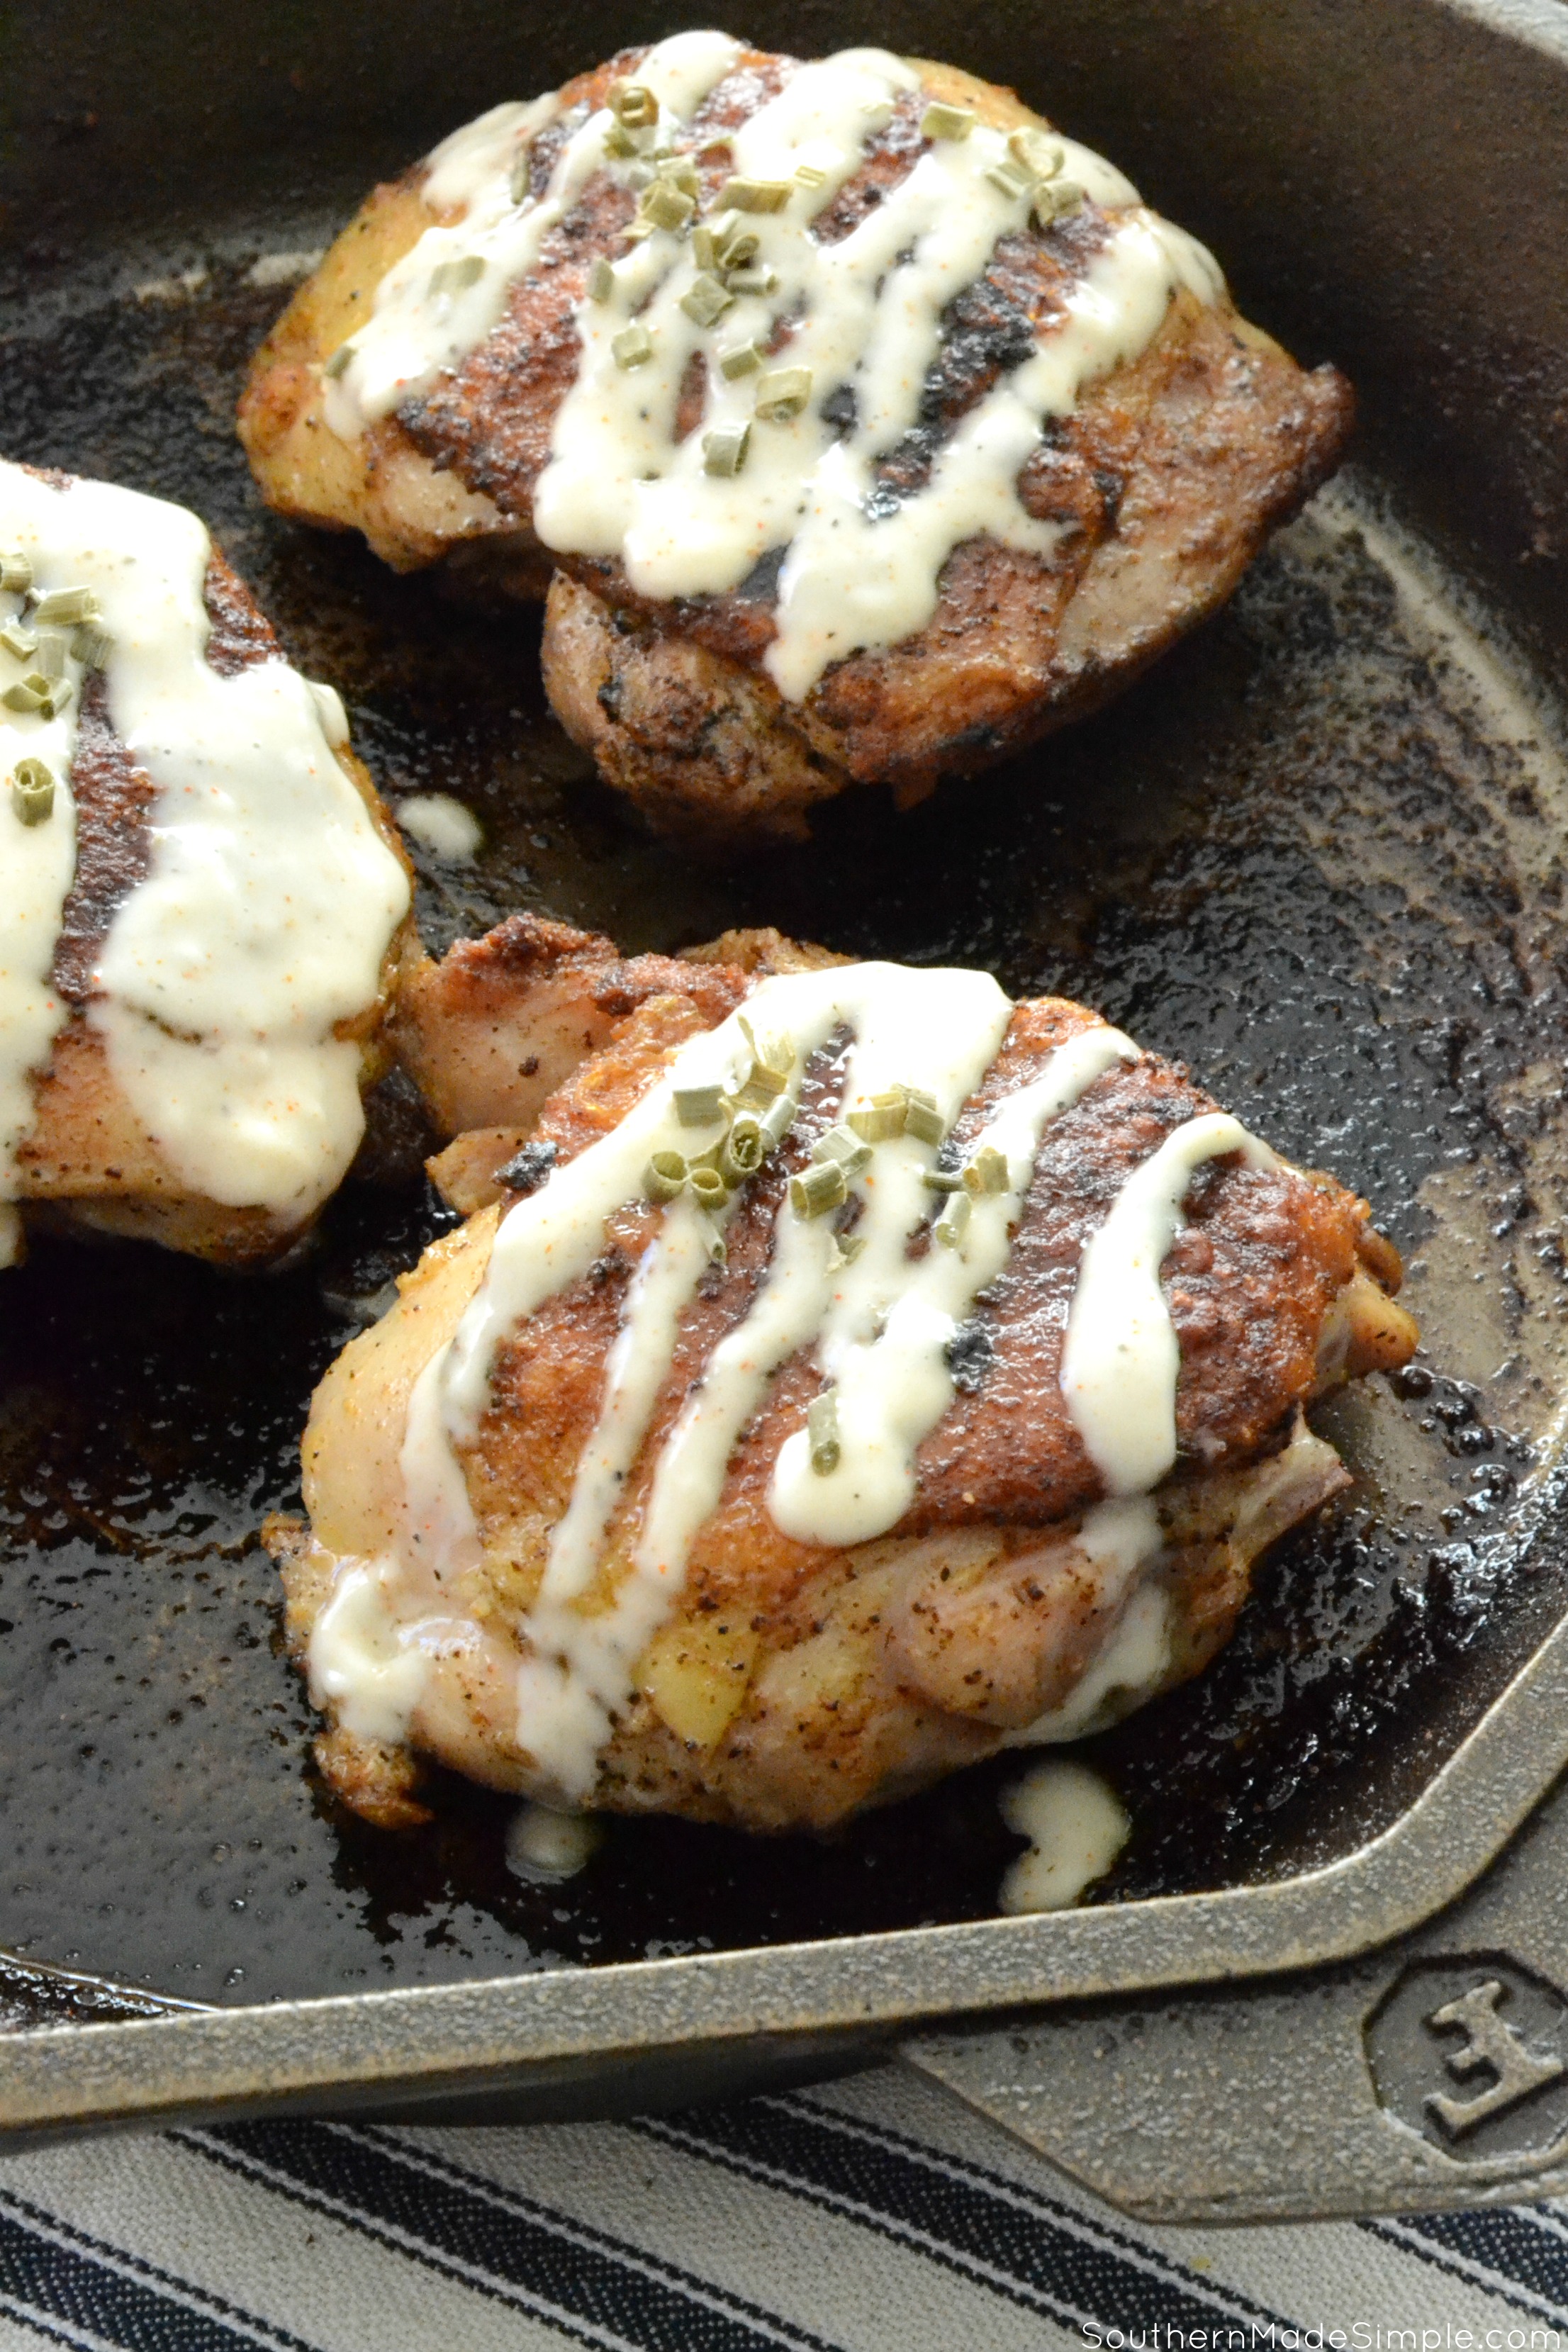 Cast Iron Skillet Cooking: Grilled Chicken Thighs with Alabama White BBQ Sauce #mysouthernkitchen #ad 